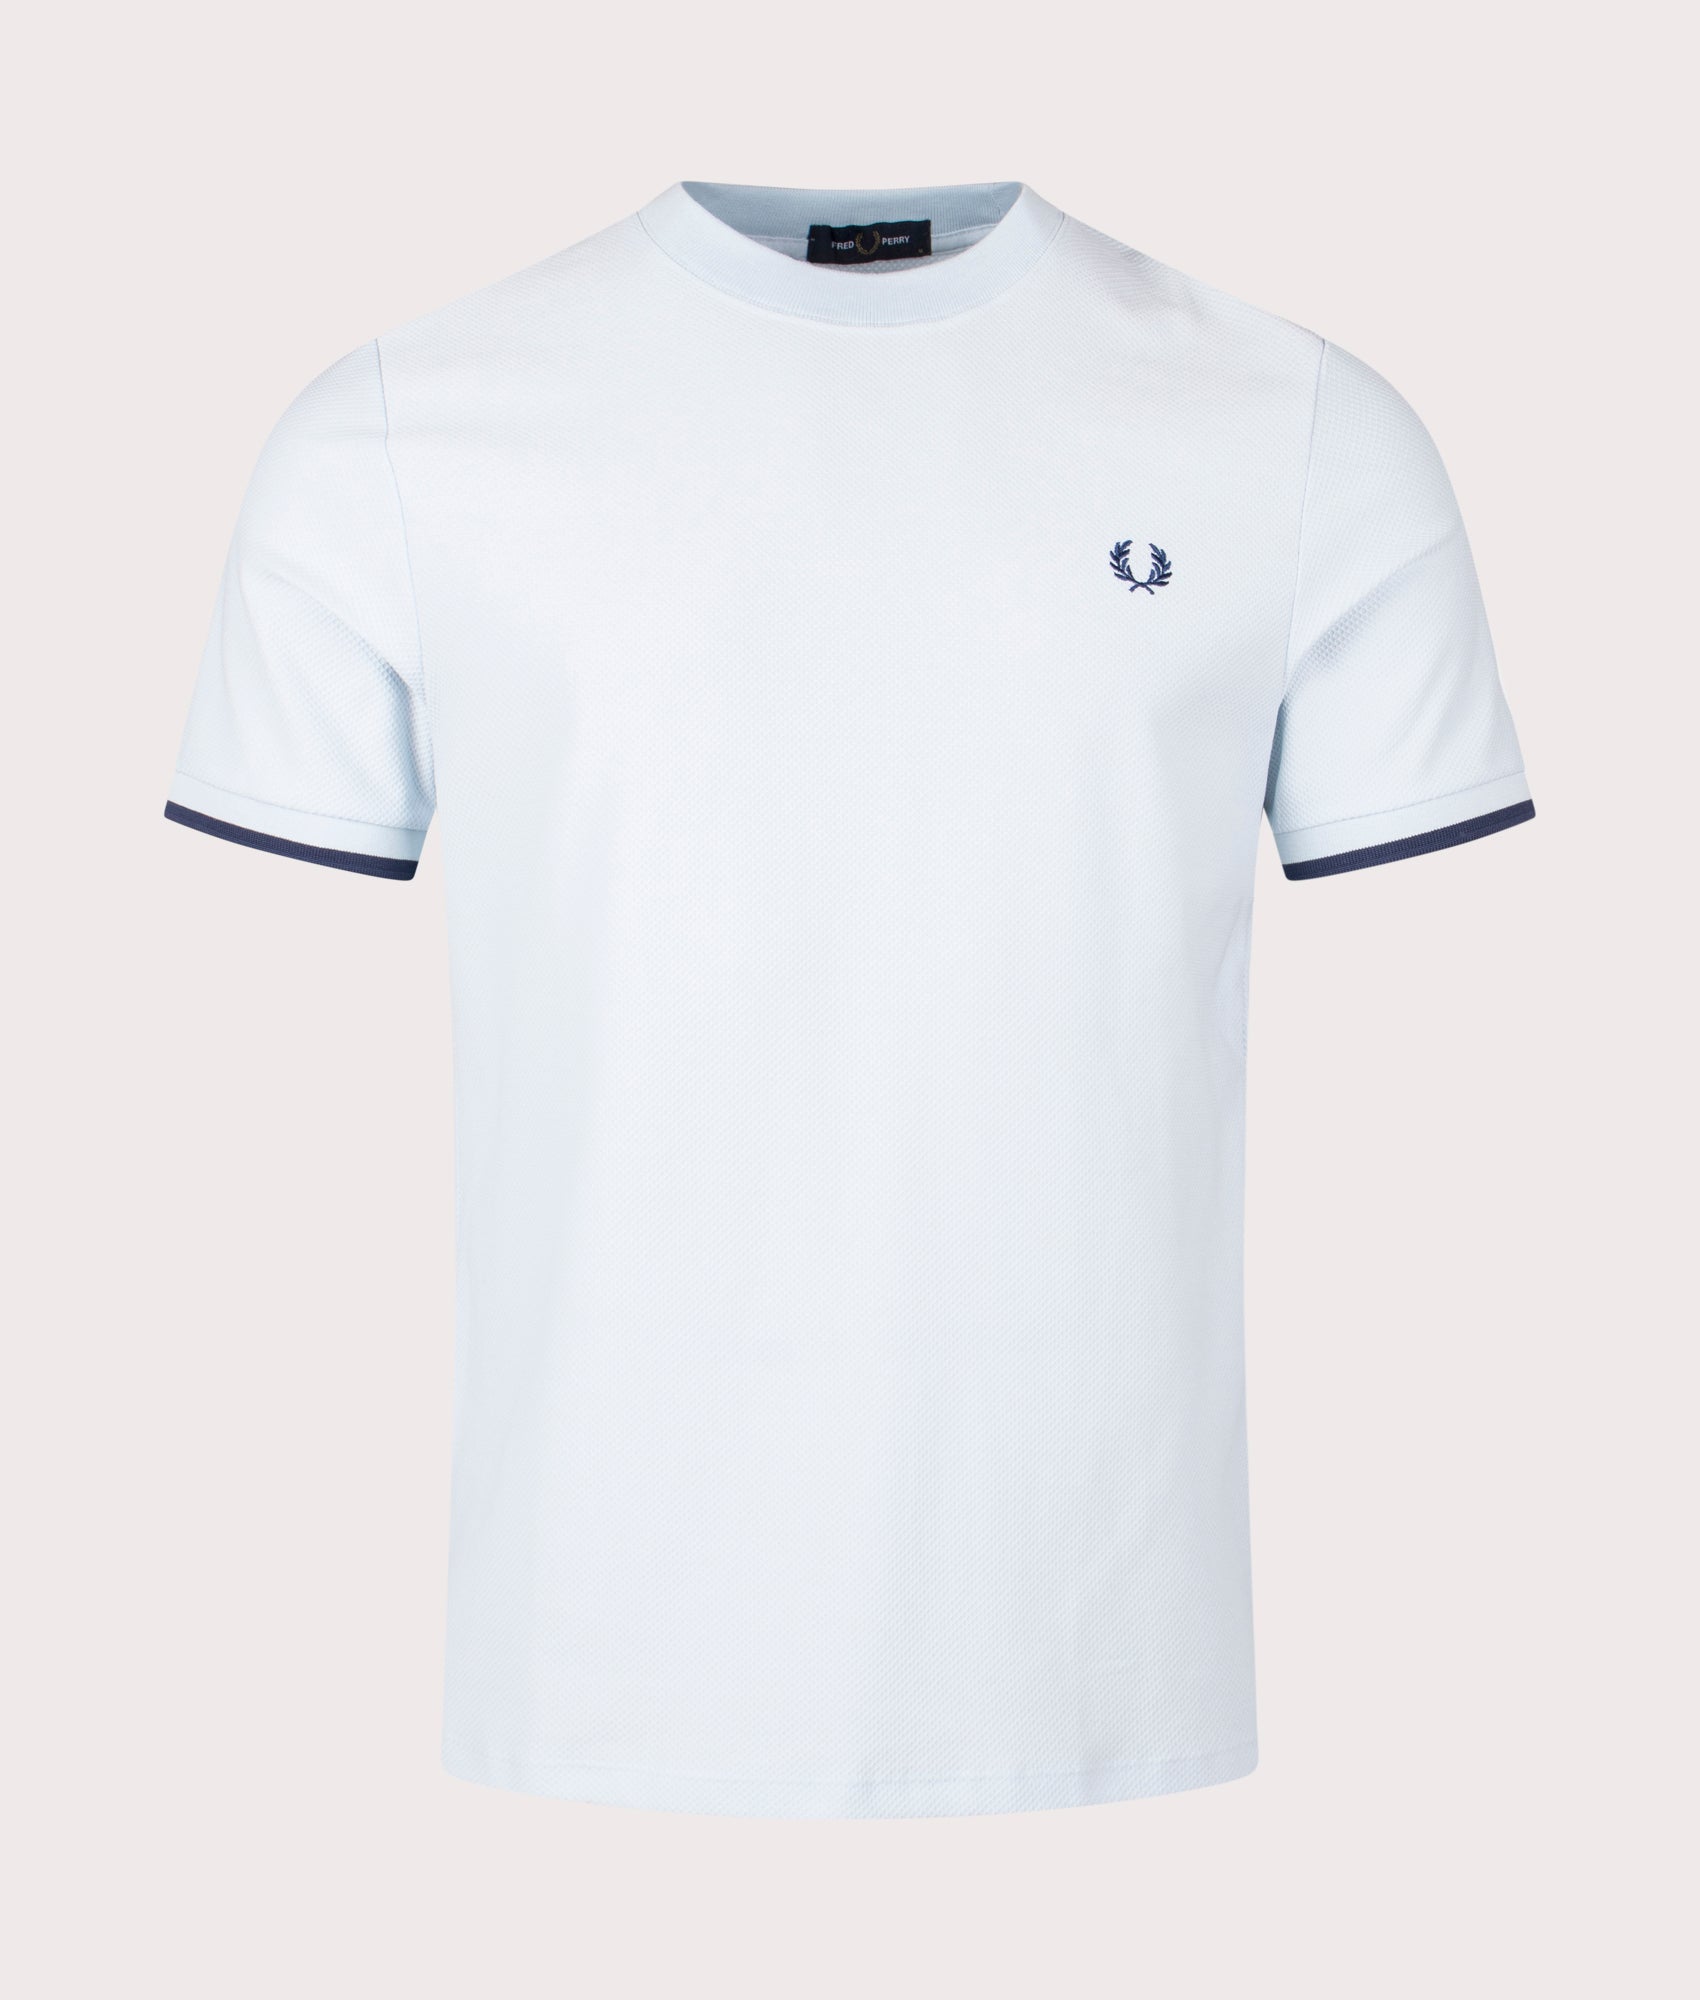 Fred Perry Mens Tipped Cuff Pique T-Shirt - Colour: R30 Light Ice - Size: Medium